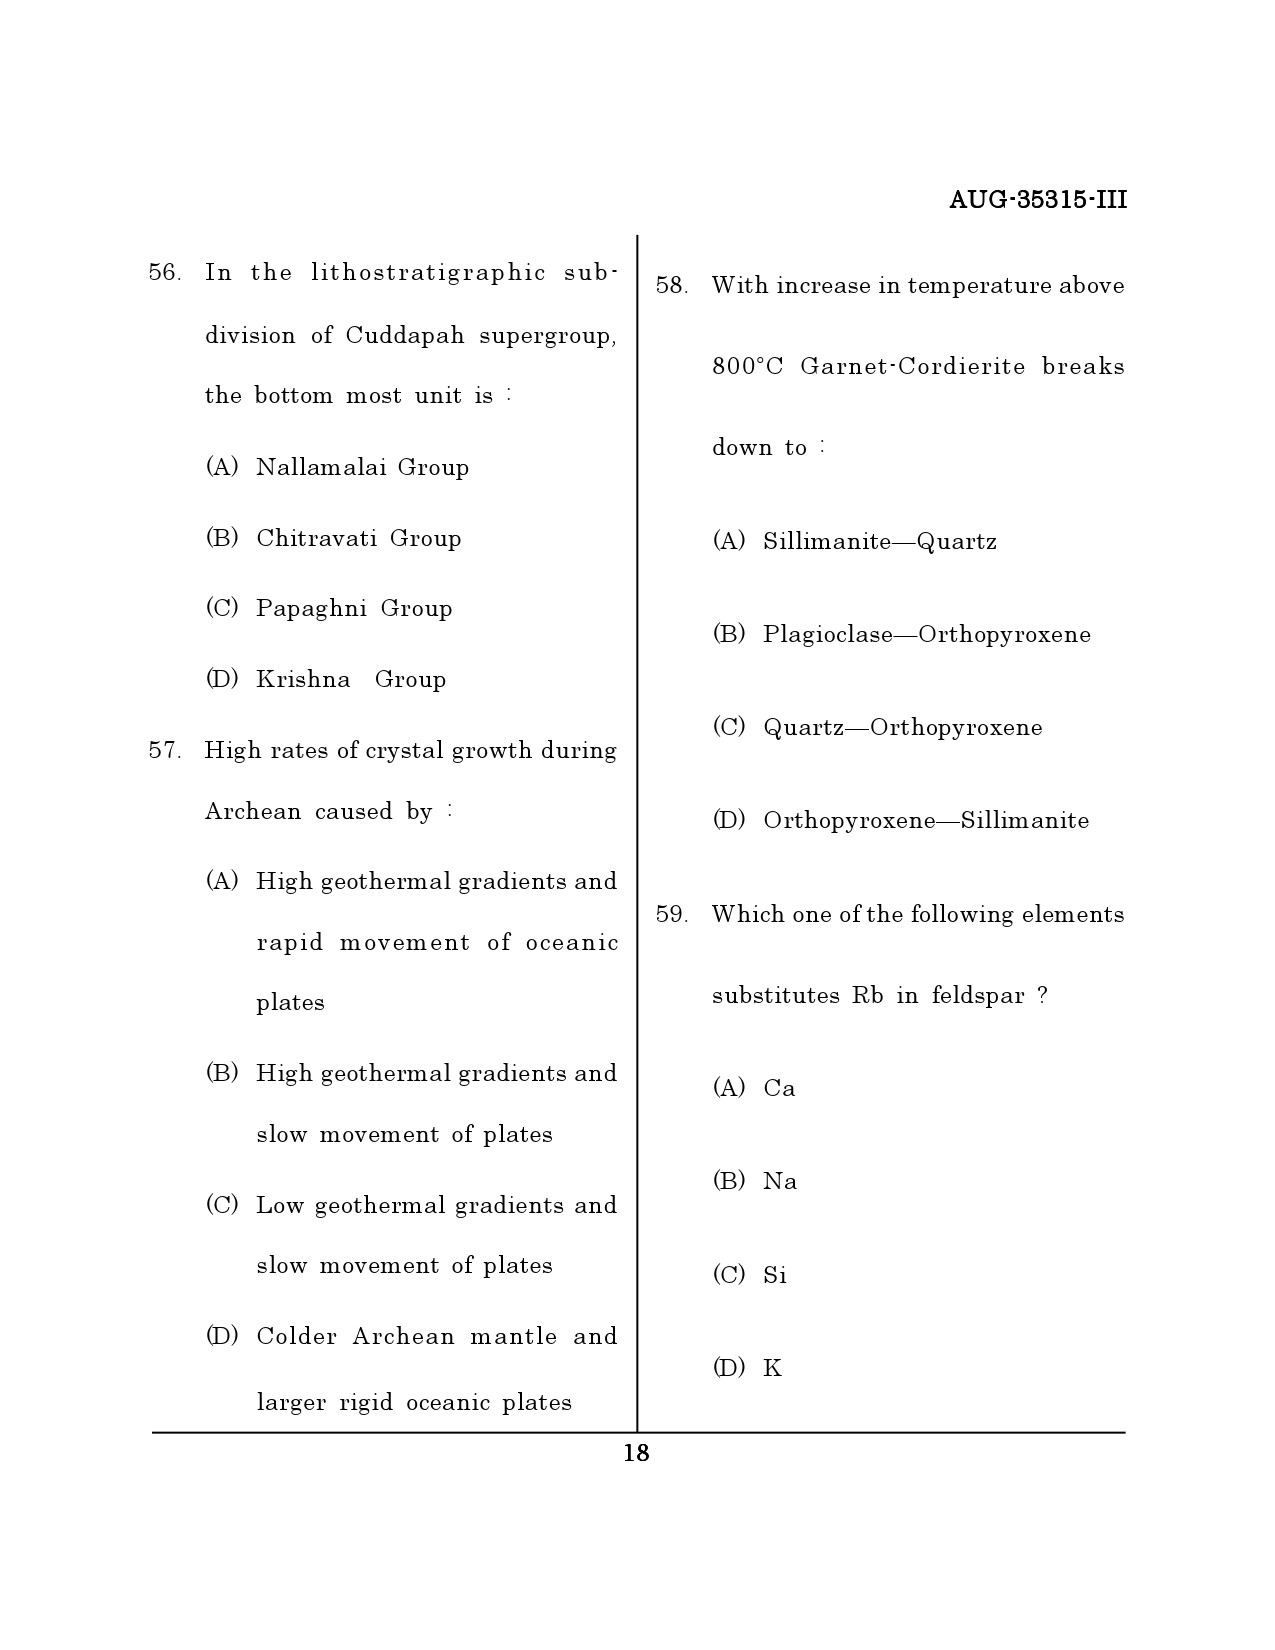 Maharashtra SET Earth Atmospheric Ocean Planetary Science Question Paper III August 2015 17